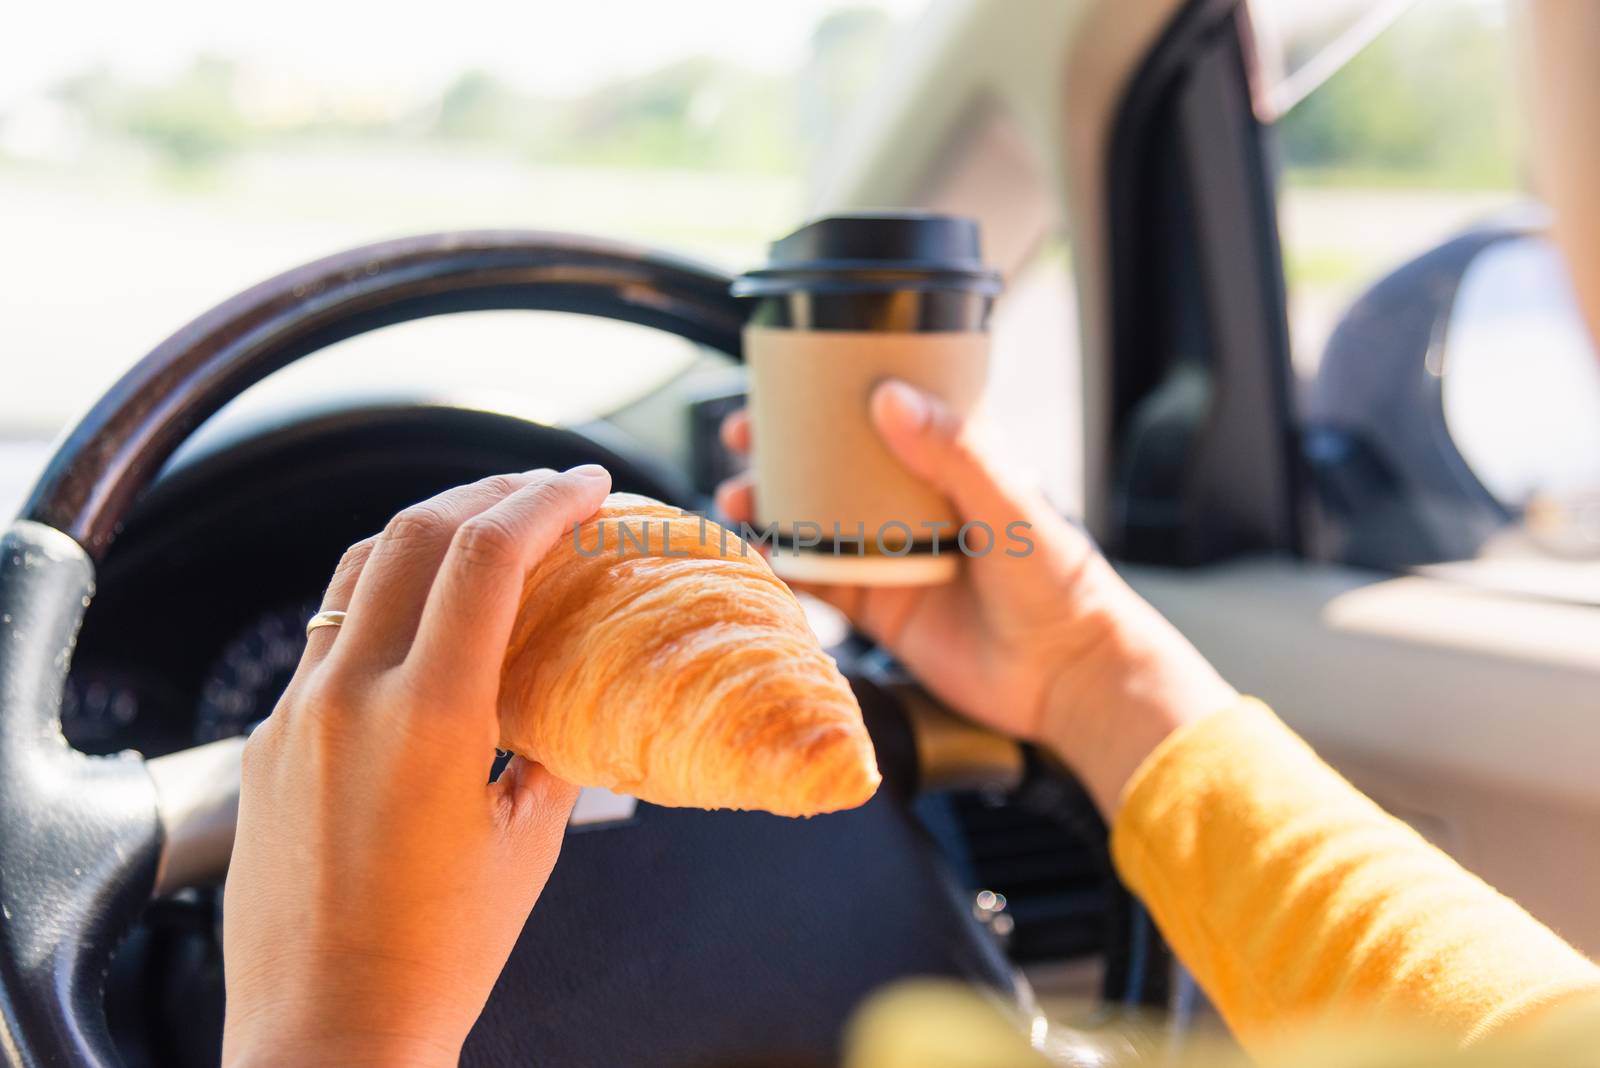 Asian woman eating food fastfood and drink coffee while driving the car in the morning during going to work on highway road, Transportation and vehicle concept